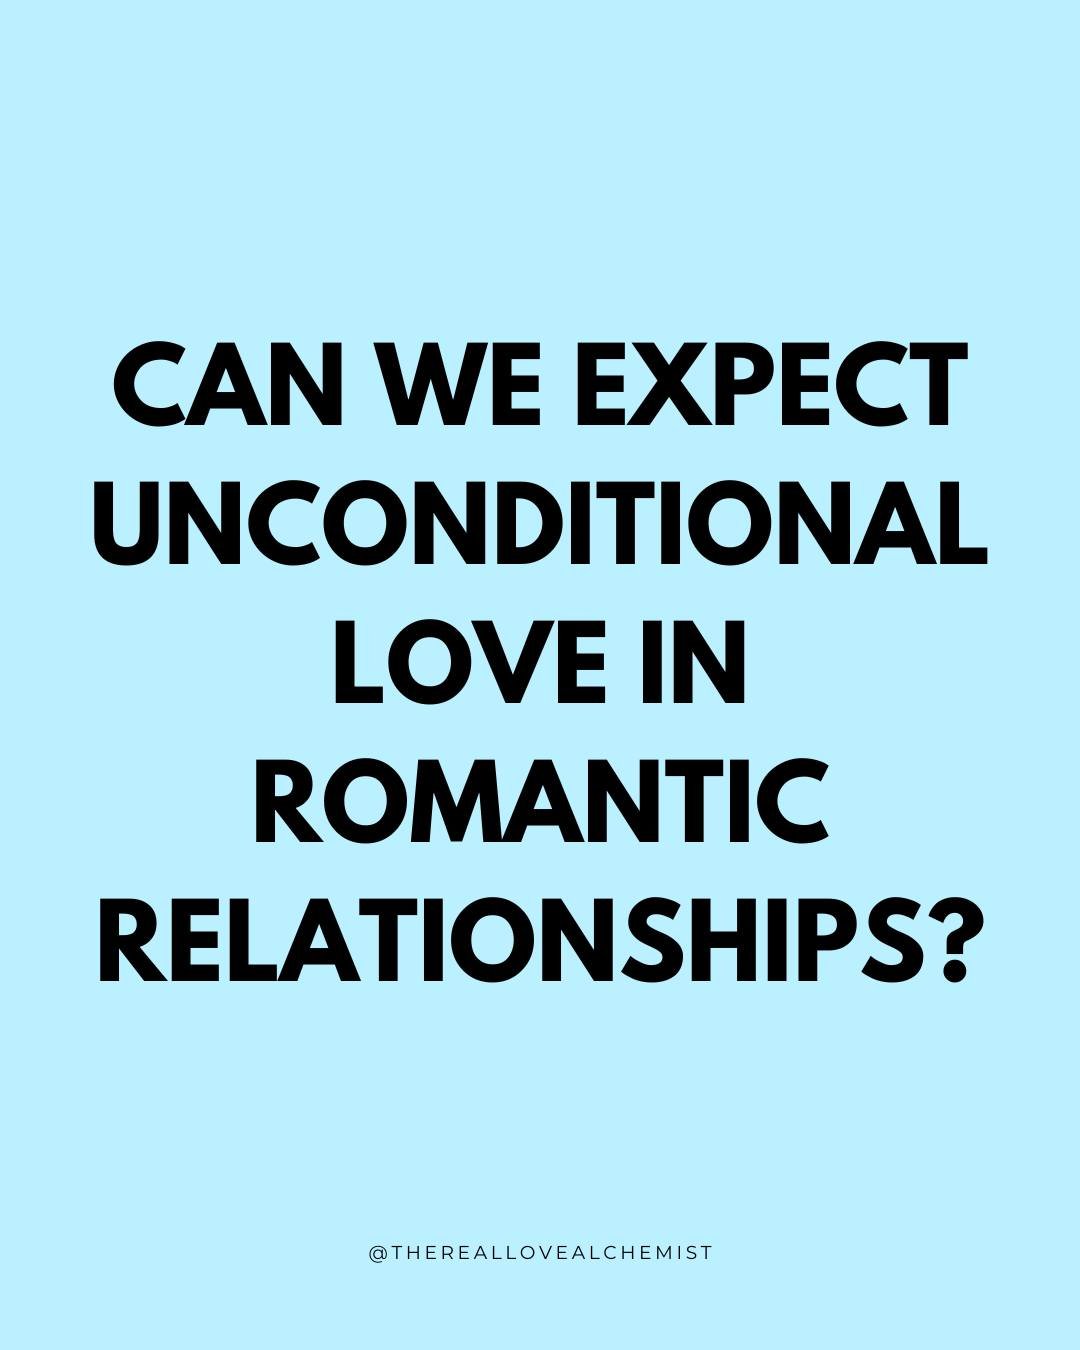 A healthy relationship has unconditional love at its core. 💗

Unconditional love is the driving force behind staying together during tough times.

🏃&zwj;♀️ When our fears and wounds are activated and they make us feel like giving up and running awa